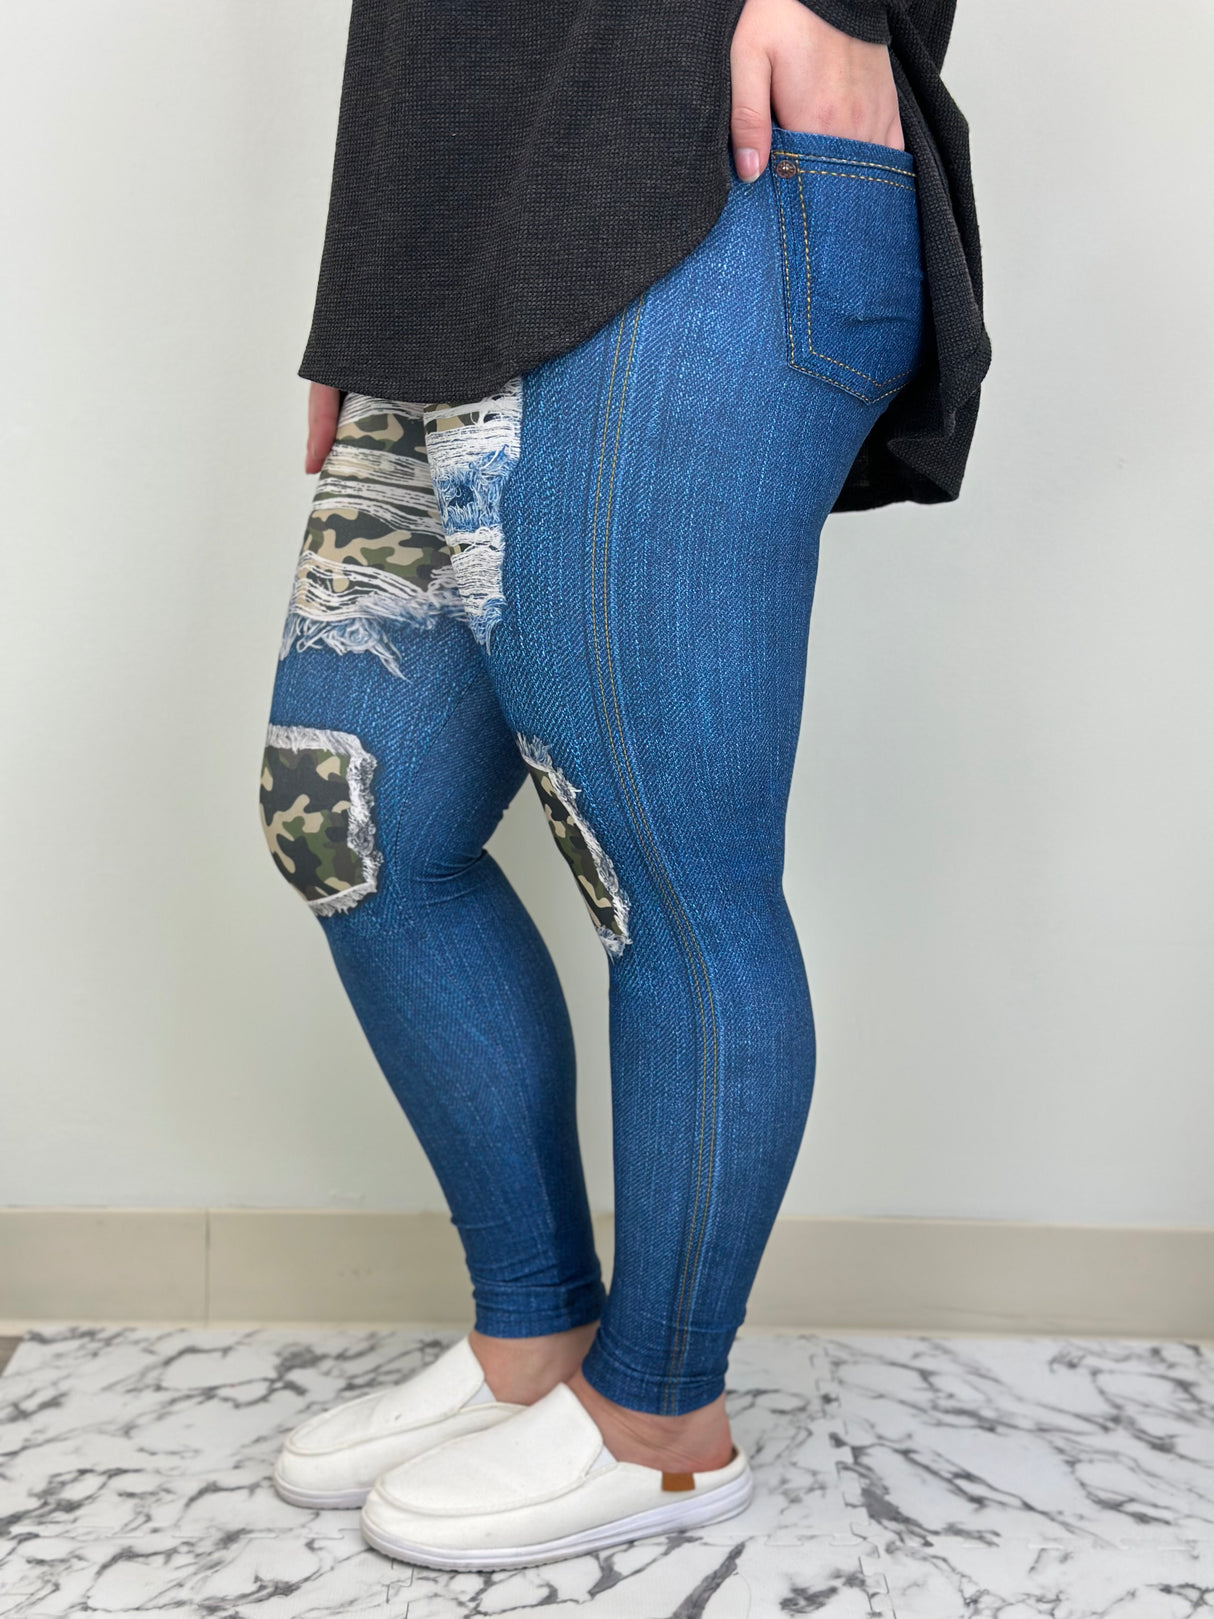  Jean Leggings With Pockets